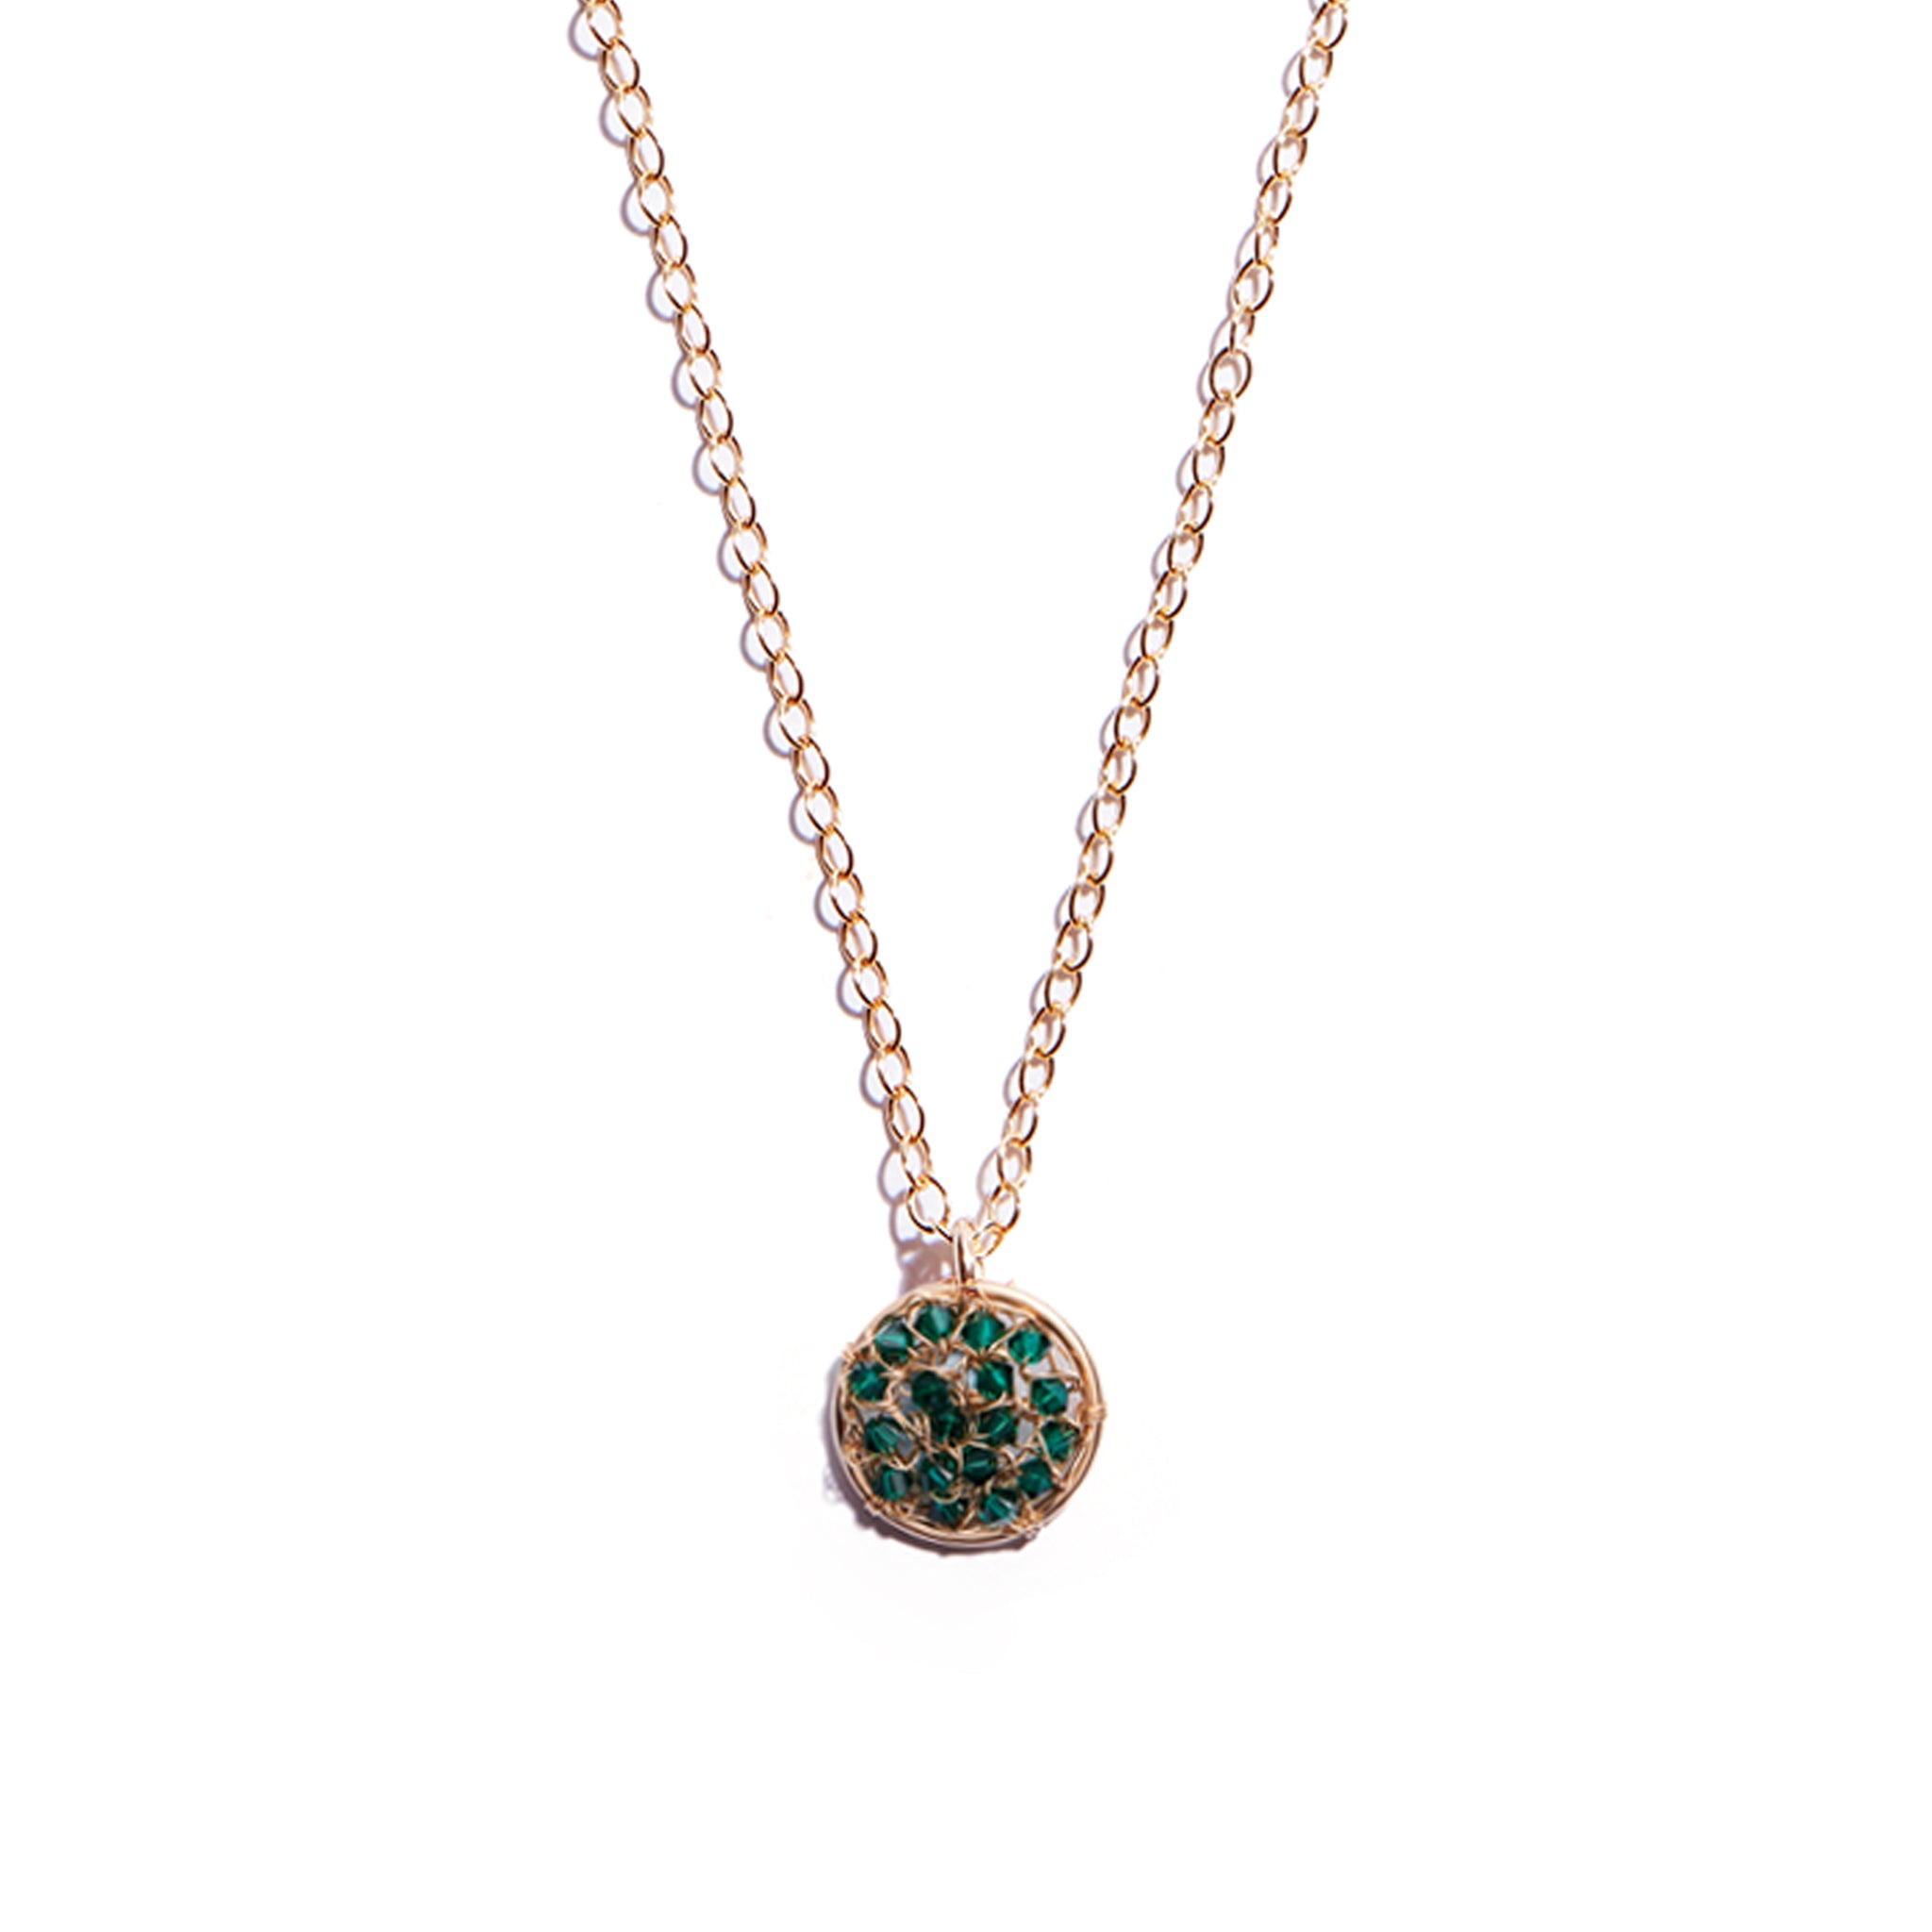 The Fí Emerald Pendant showcases our classic Fí design of delicate, woven gold but in this piece we have incorporated emerald green gems to add a little something extra. This piece is perfect for adding a little pop of emerald green to your outfit.